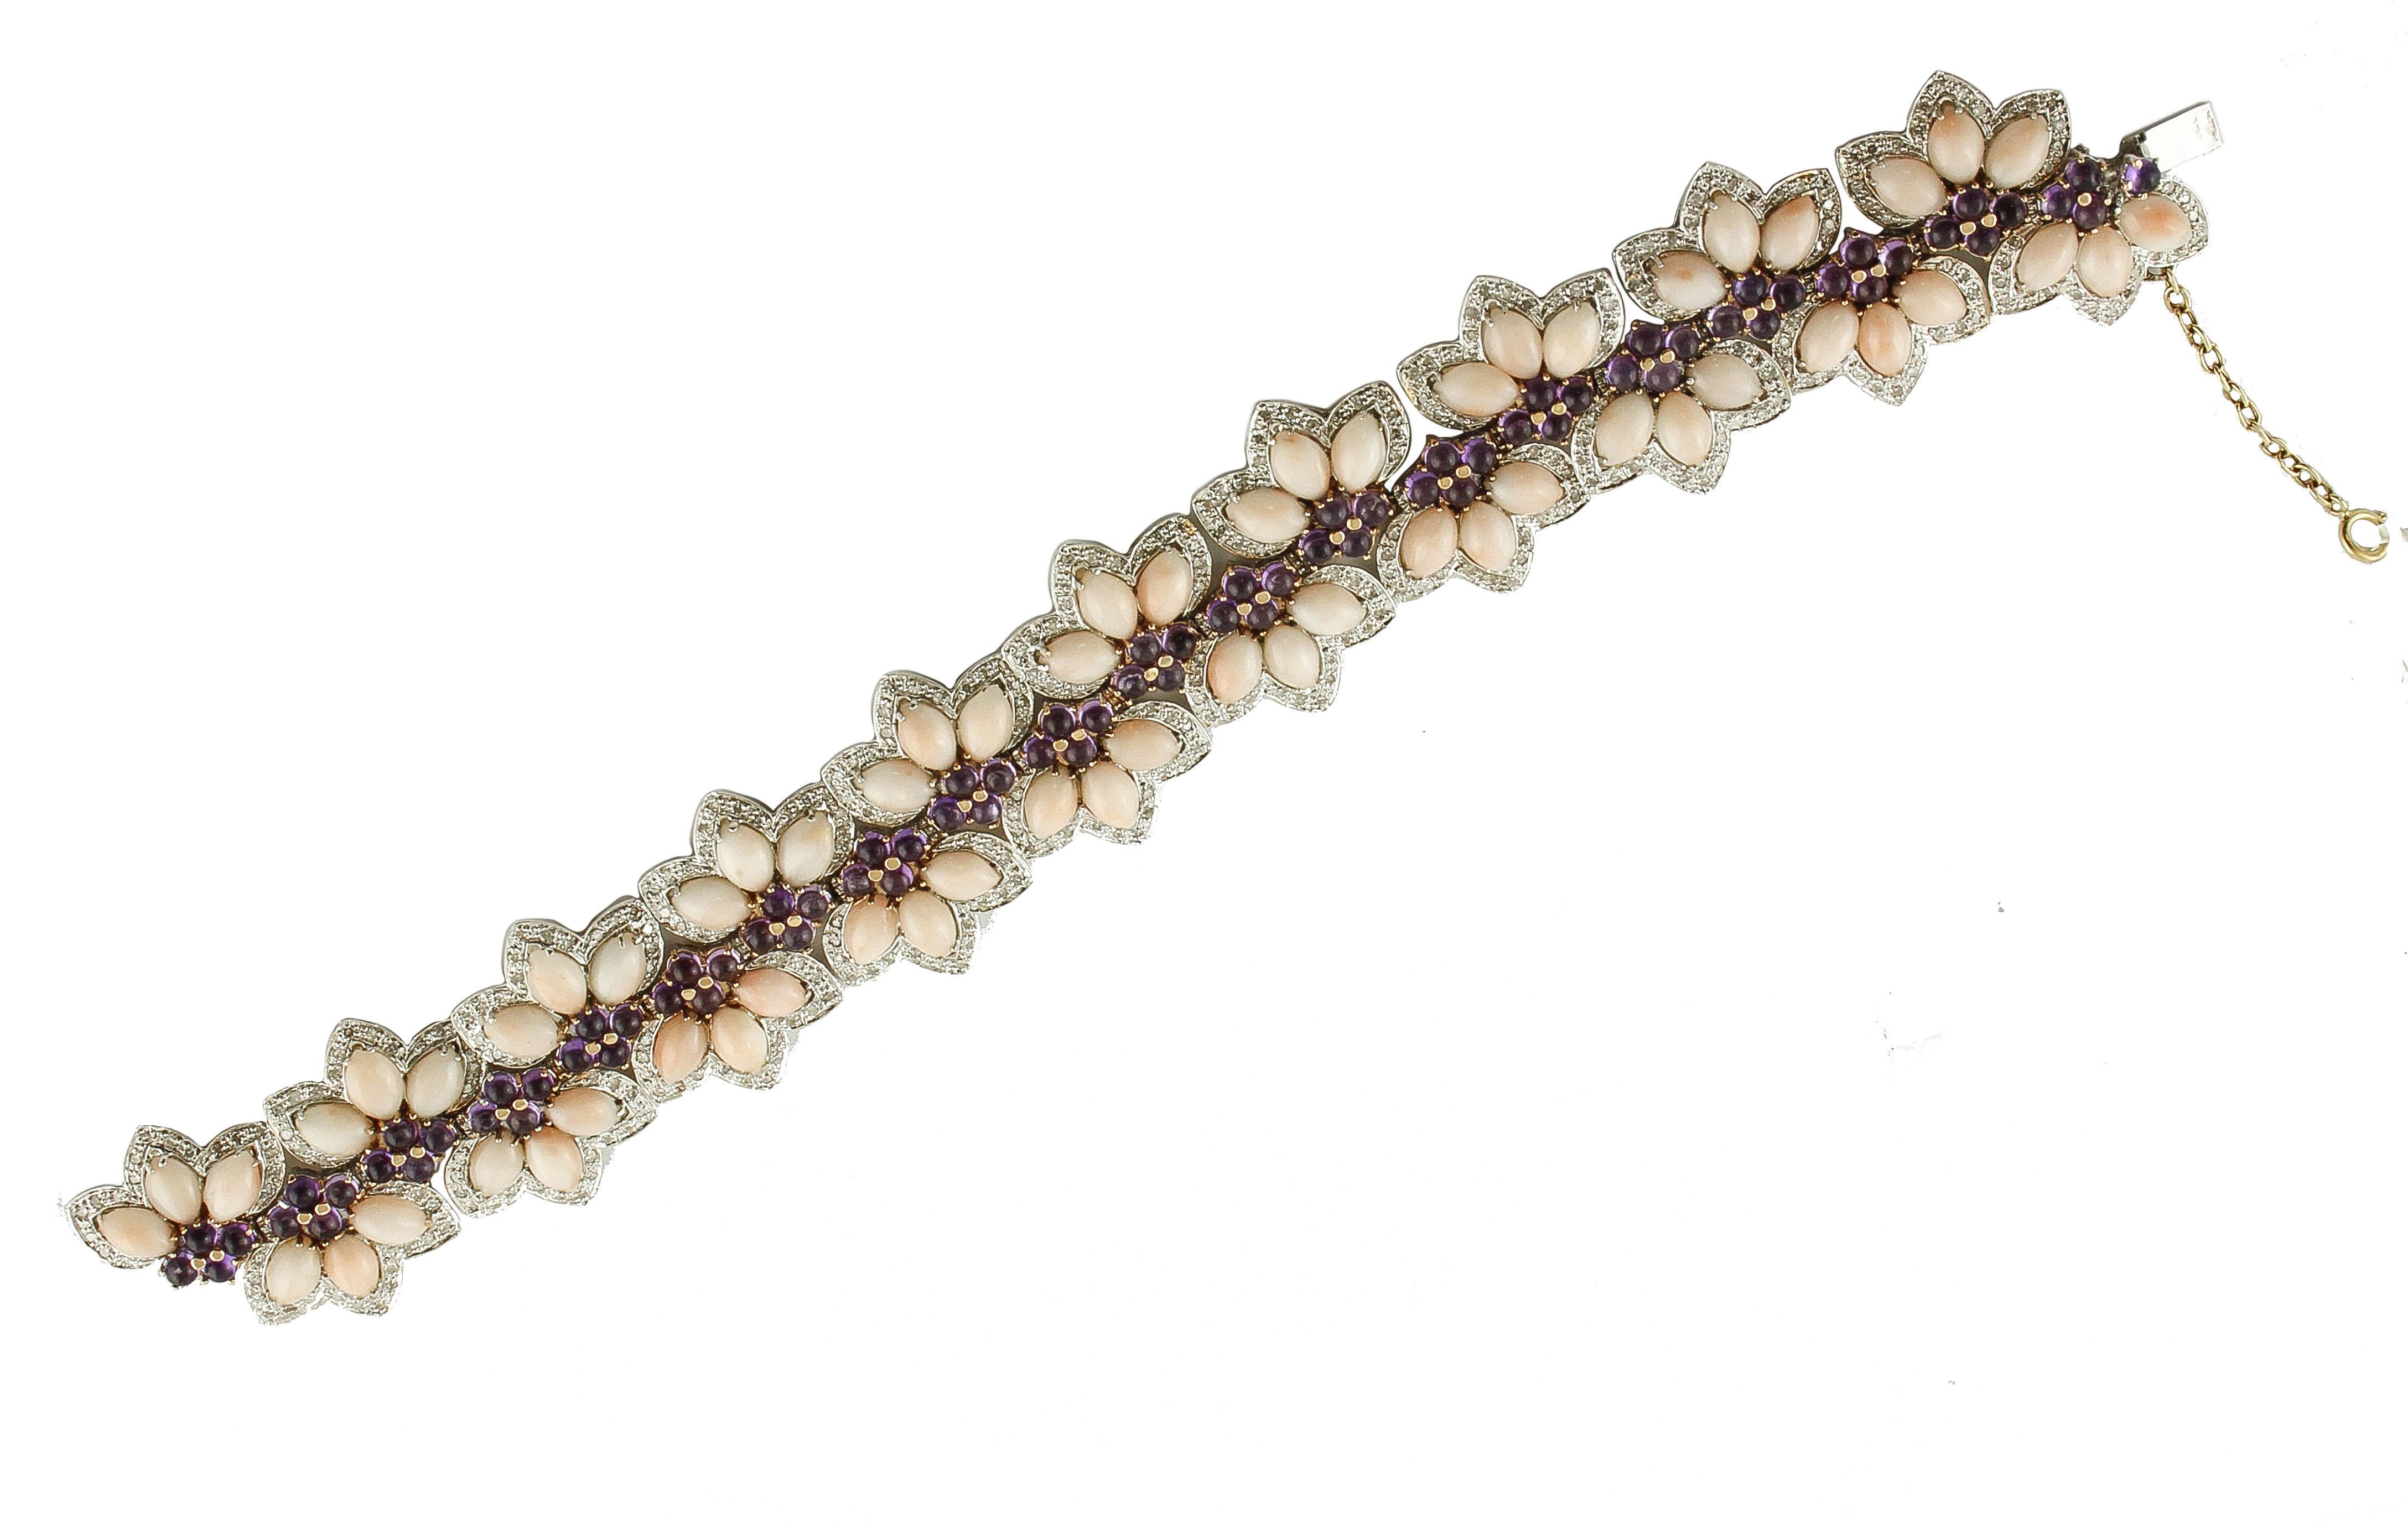 Retro White Diamonds, Amethysts, Pink Coral Drops, White/Rose Gold Flowers Bracelet For Sale